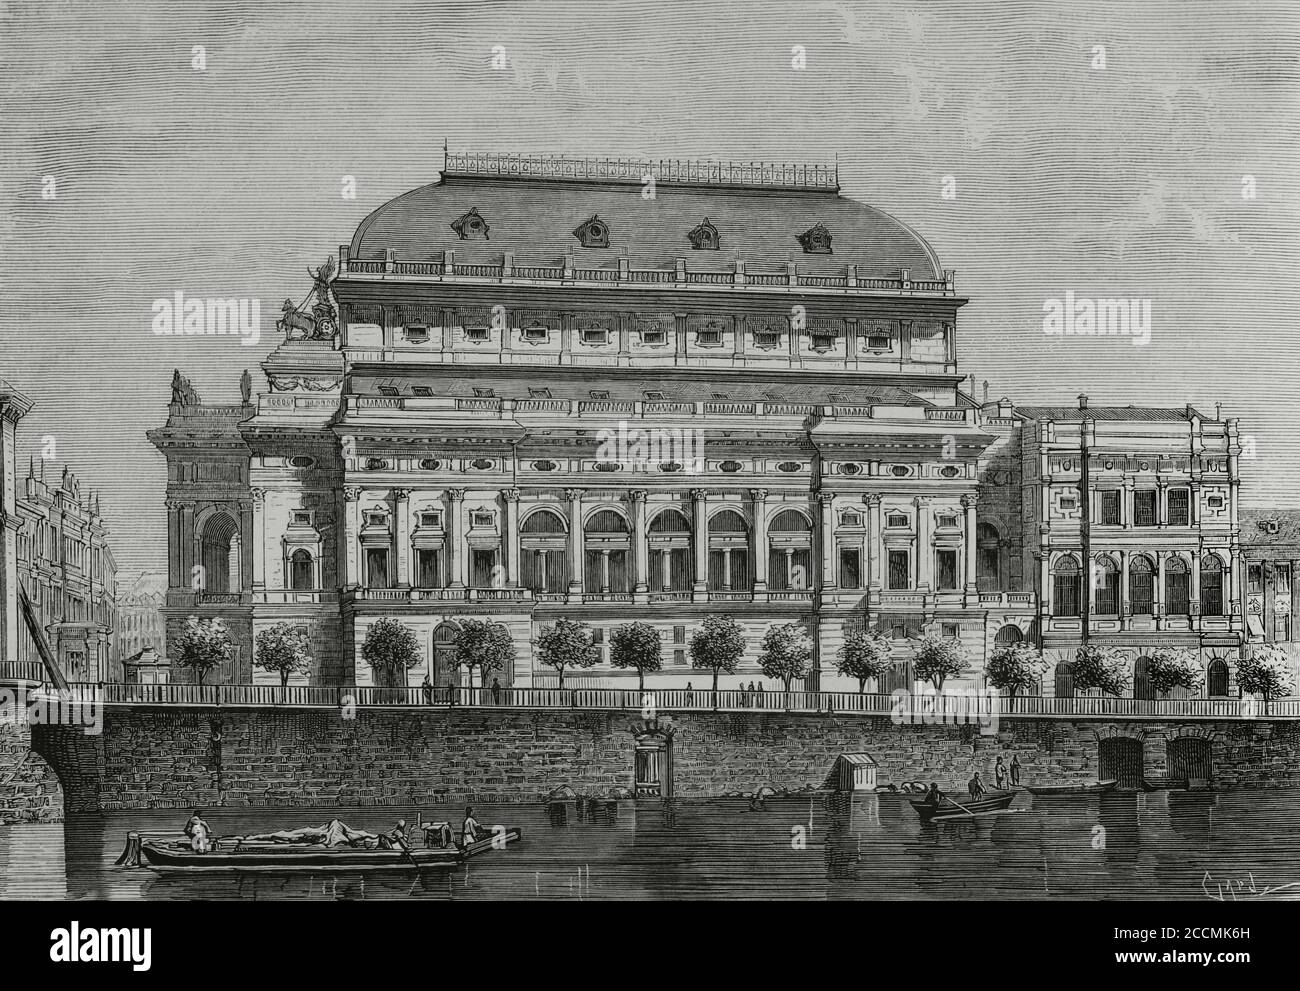 Kingdom of Bohemia (Austro-Hungarian Empire). Prague. The National Theatre. It was opened for the first time on June 11, 1881, to honour the visit of Crown Prince Rudolf of Austria. Engraving by Tomás Carlos Capuz (1834-1899). La Ilustracion Española y Americana, 1881. Stock Photo